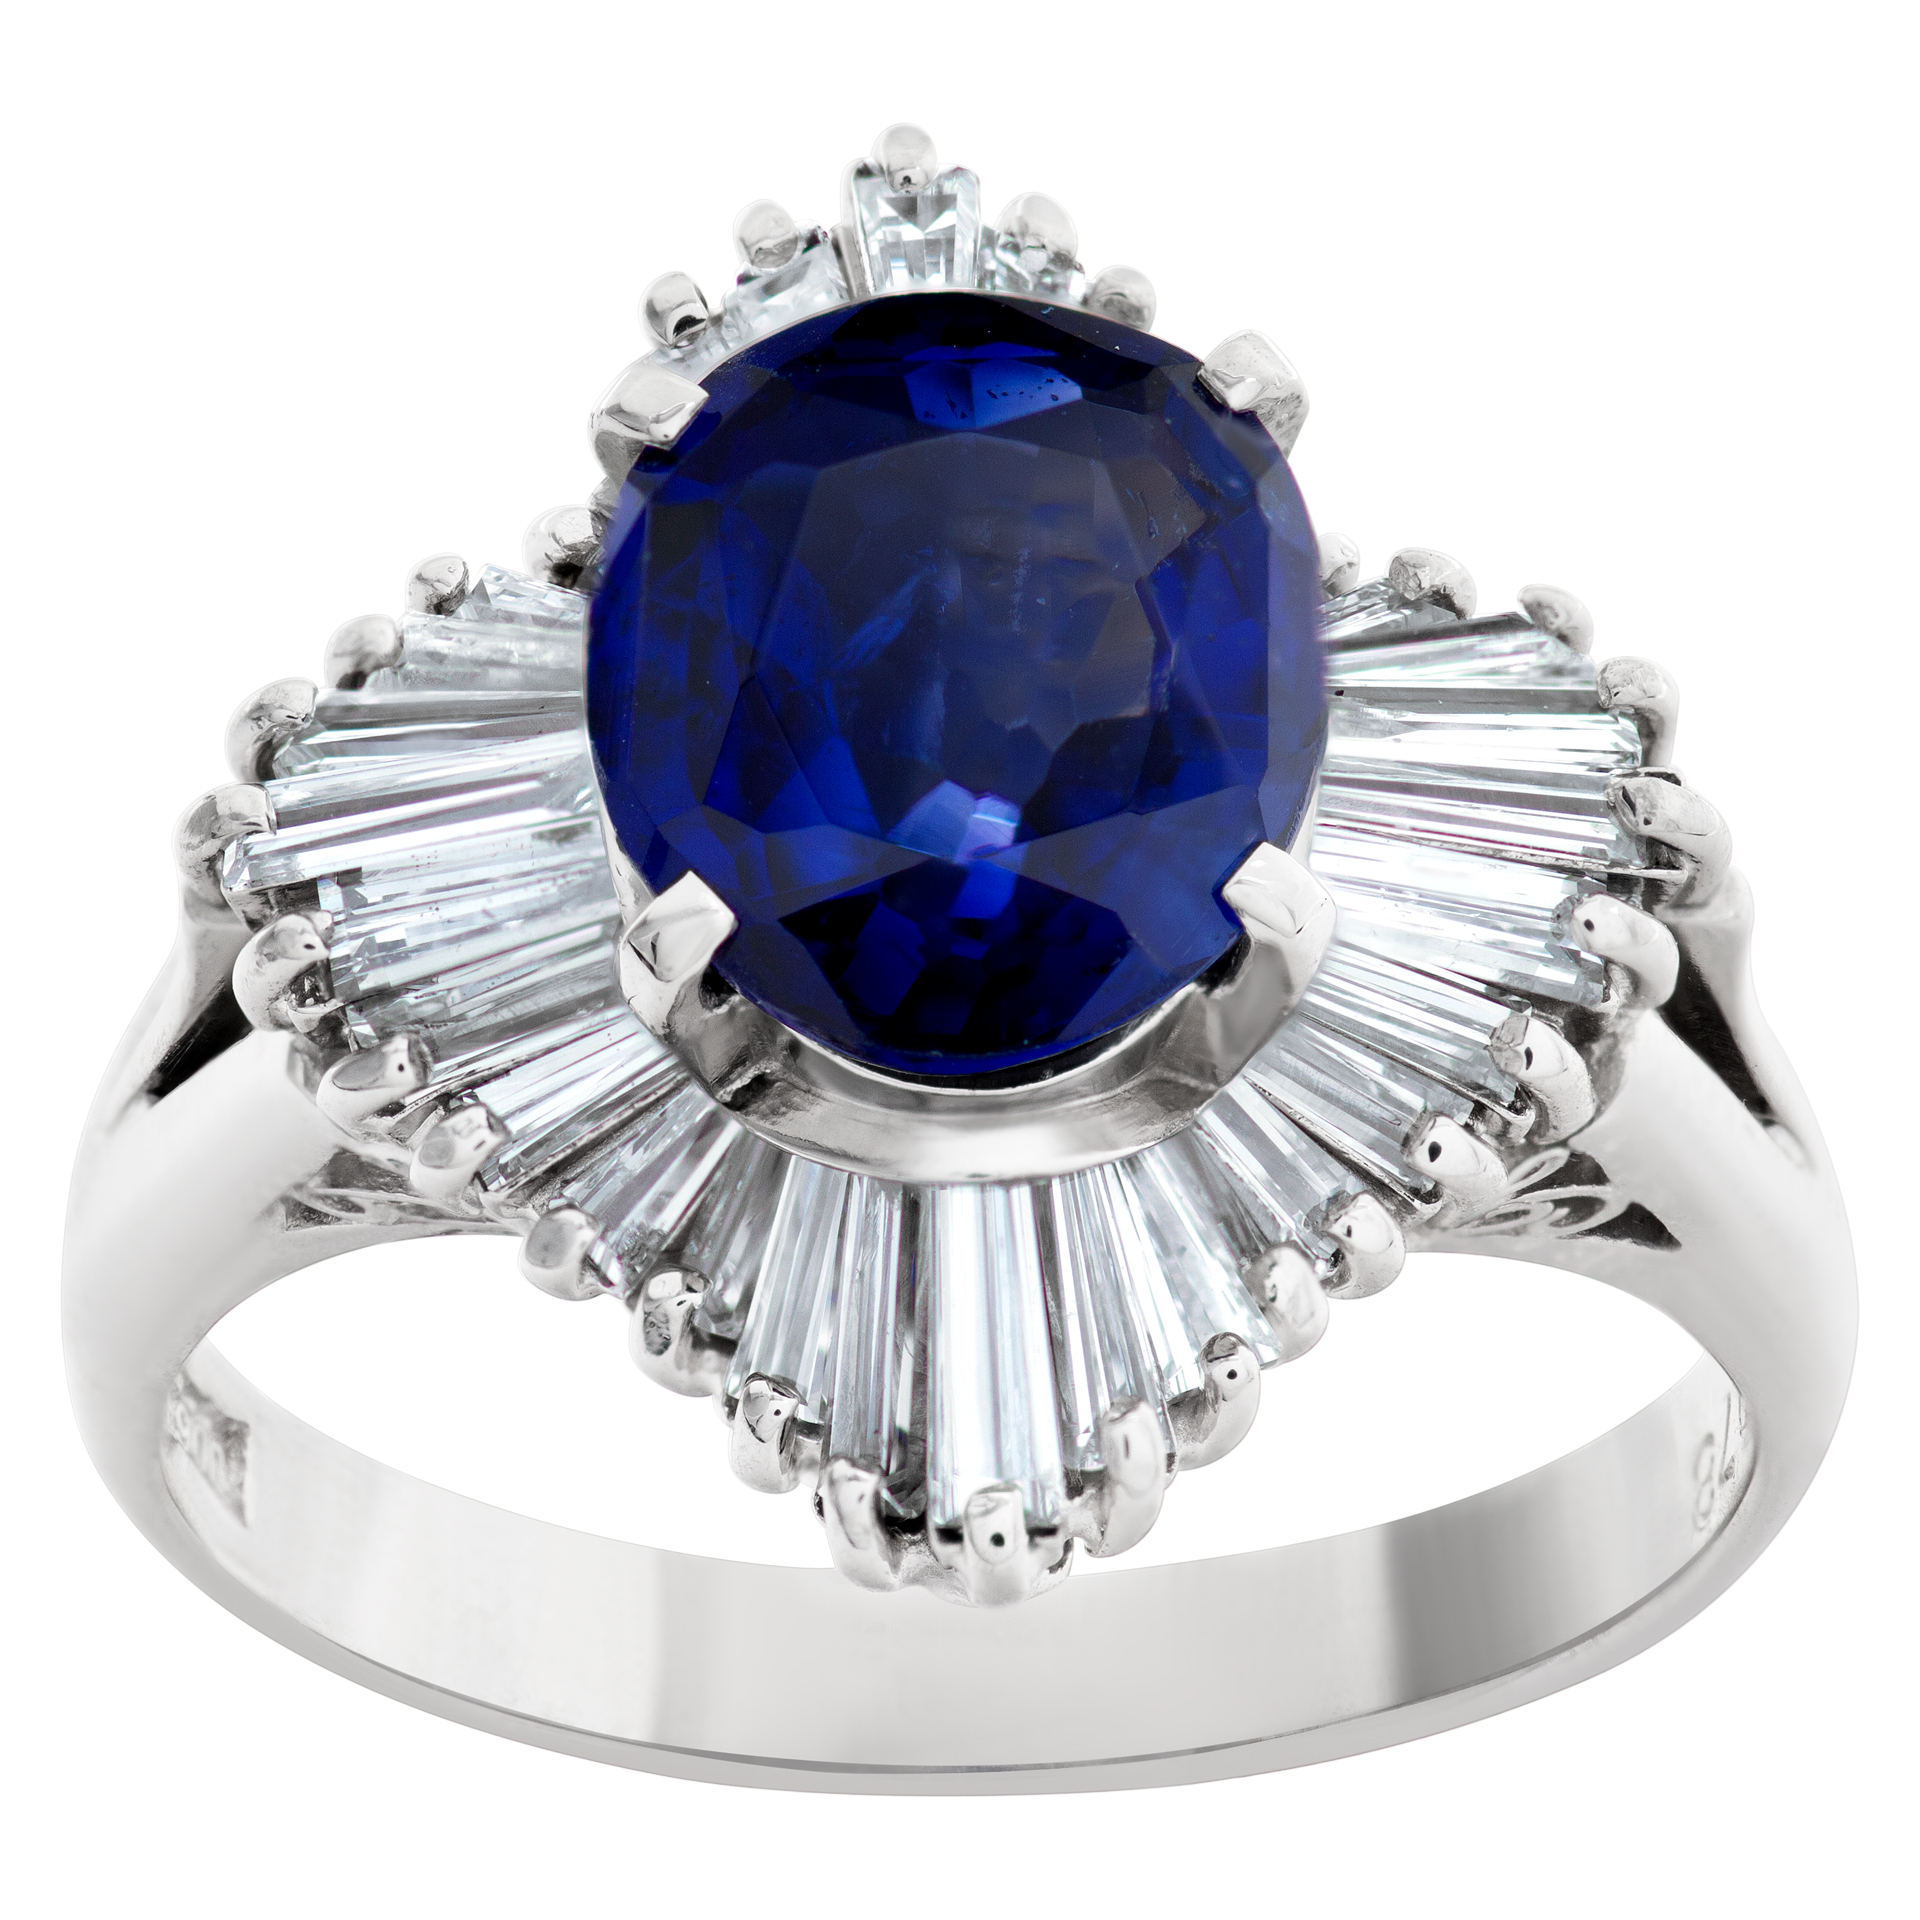 Deep blue oval sapphire ring with baguette diamonds in platinum